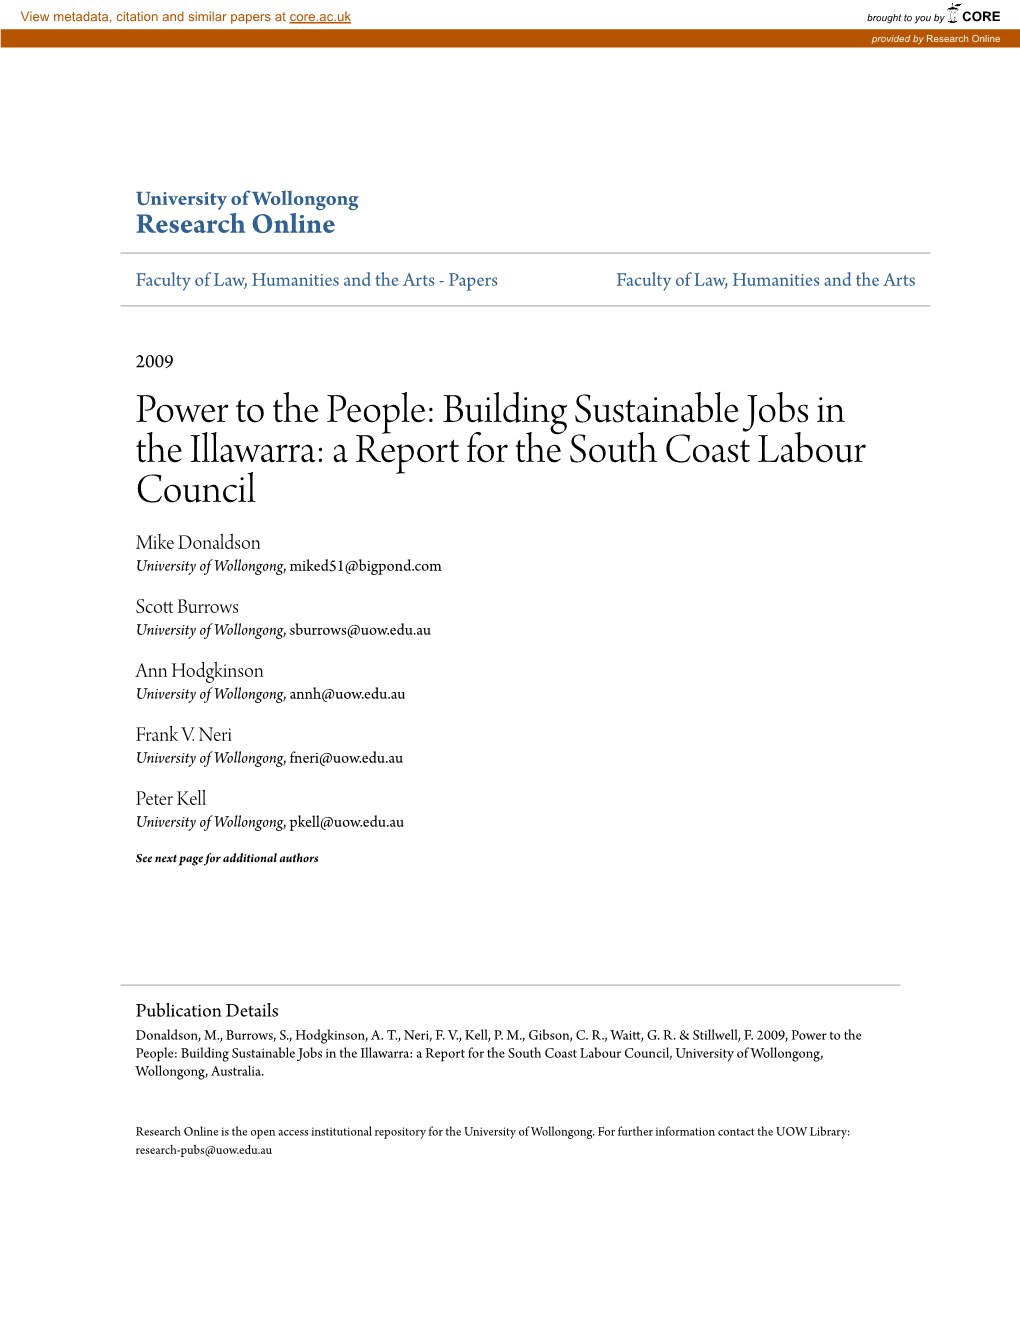 Power to the People: Building Sustainable Jobs in the Illawarra